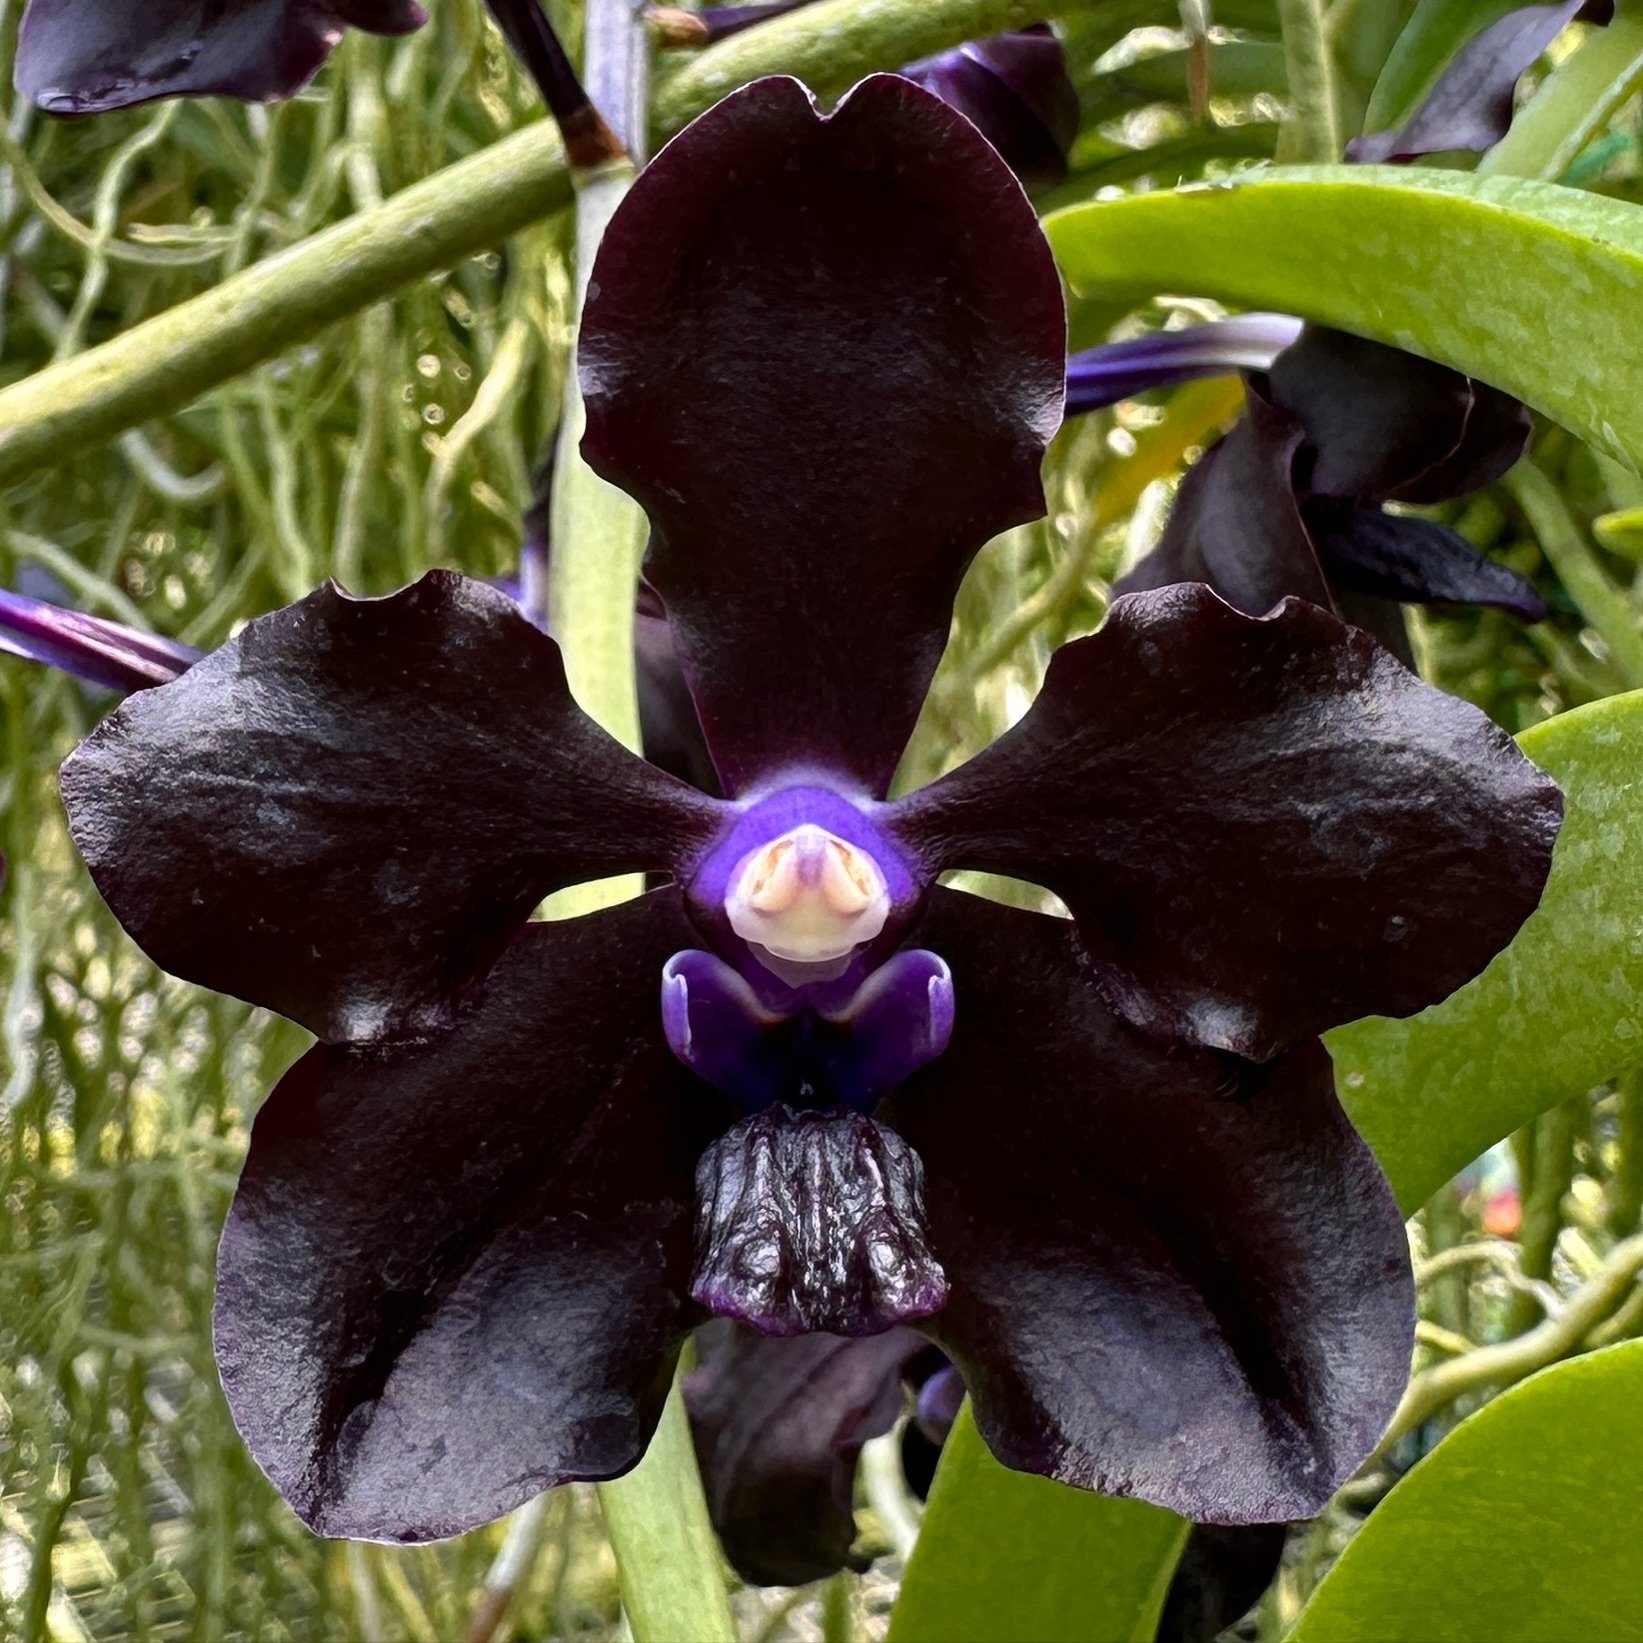 Vanda Motes x-29, third generation x series hybrid. In bloom today. 

Want to help us grow? Click &ldquo;follow&rdquo; then share the posts that make you go wow! Thanks!
.
.
.
.
.
#motesorchids
#FloridaOrchidGrowing #orchids #orchid #vanda #orchidoft